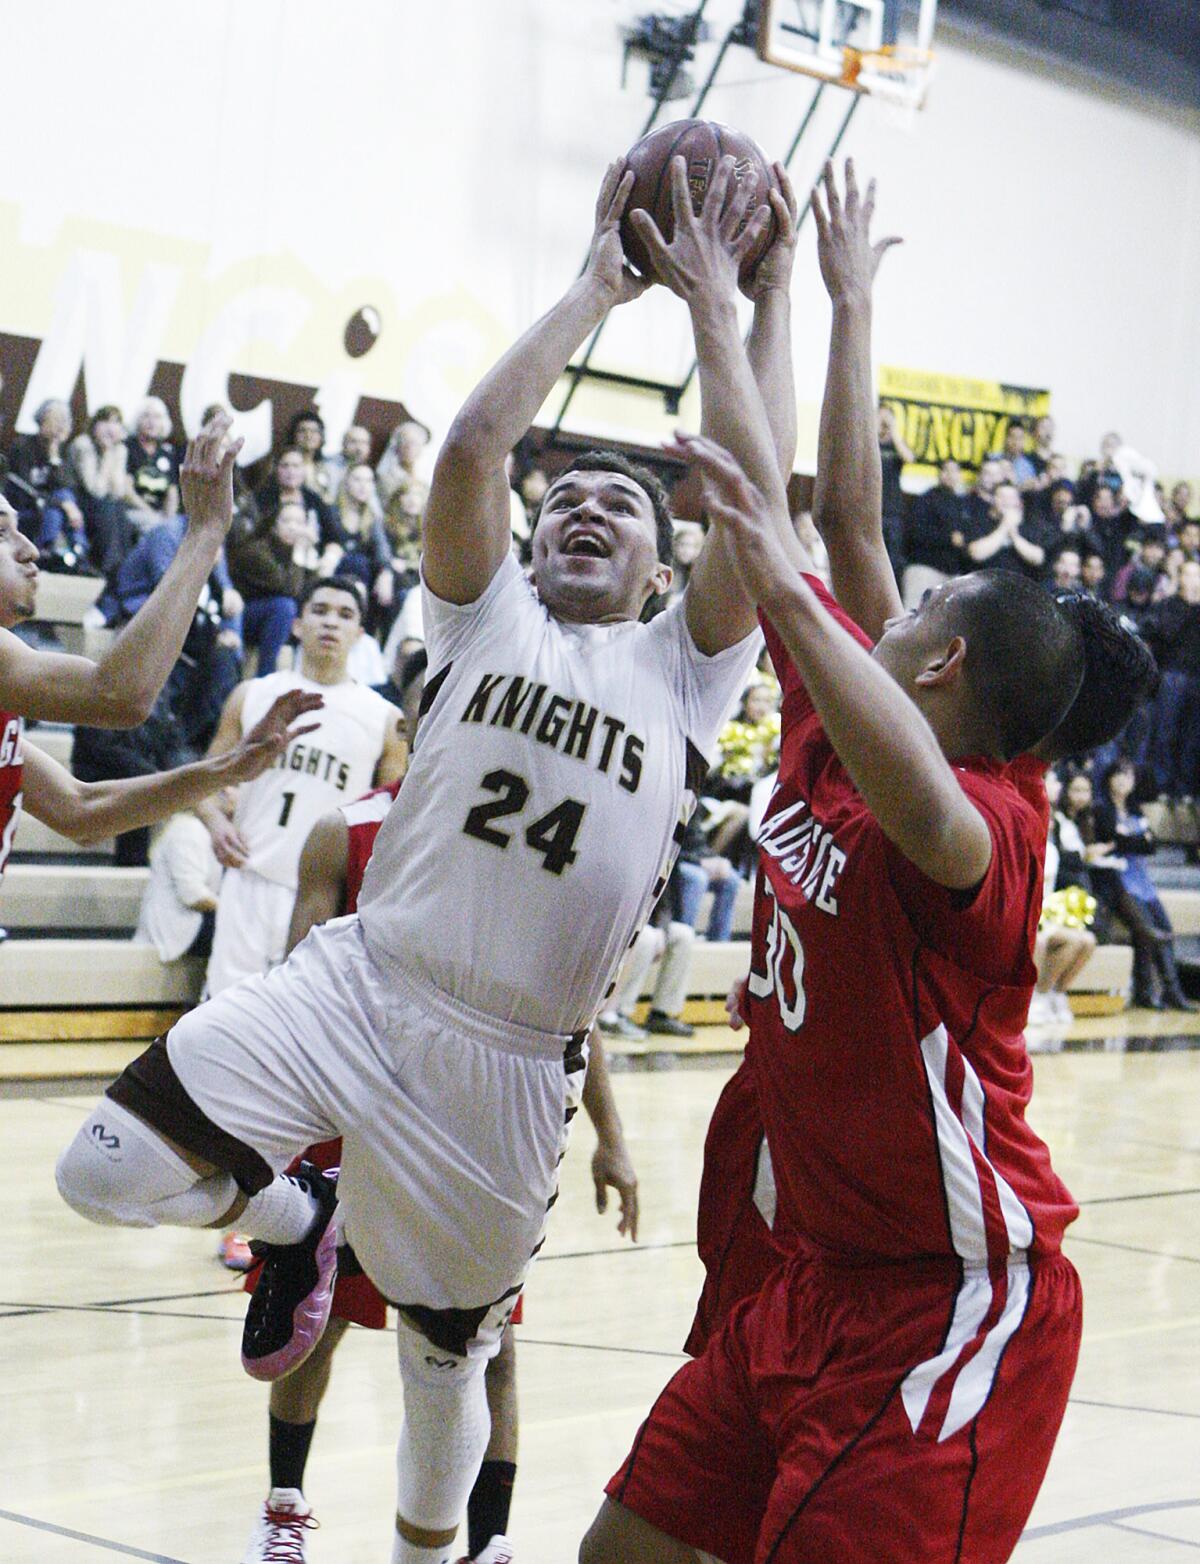 St. Francis' Noah Willerford drives to the basket to shoot against Gladstone's Manny Chavira in a CIF quarterfinal boys basketball game at St. Francis High School in La Canada Flintridge on Tuesday, February 25, 2014.